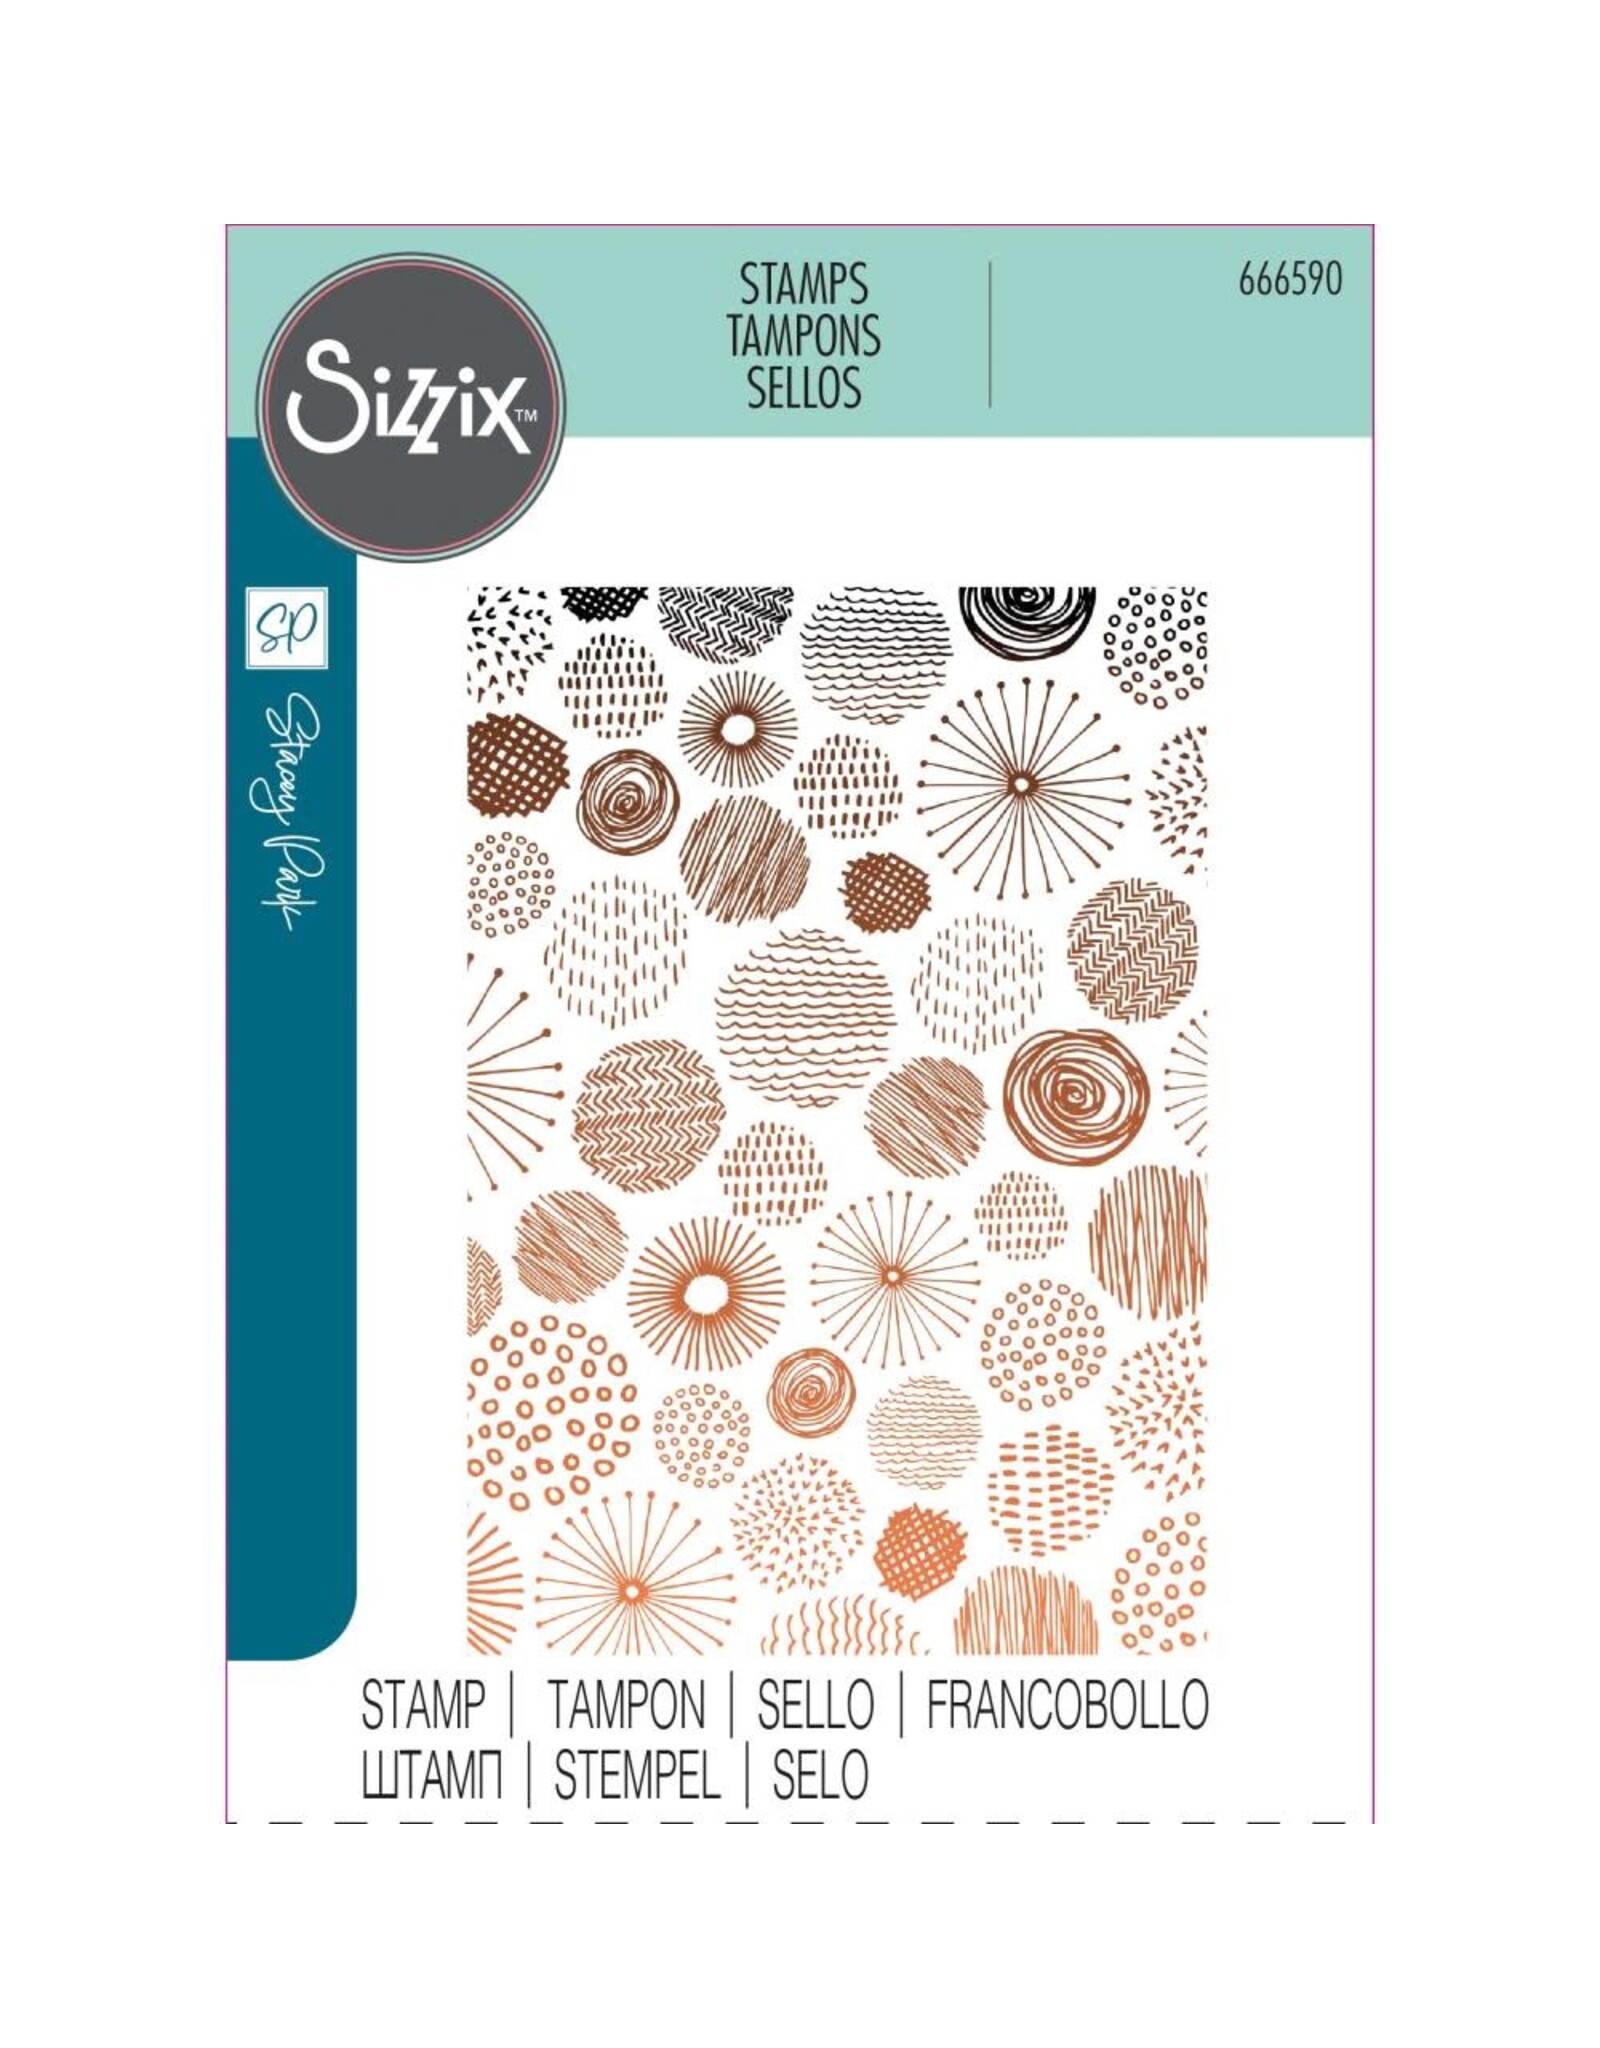 SIZZIX SIZZIX STACEY PARK COSMOPOLITAN, ECLIPTIC CLEAR STAMP SET